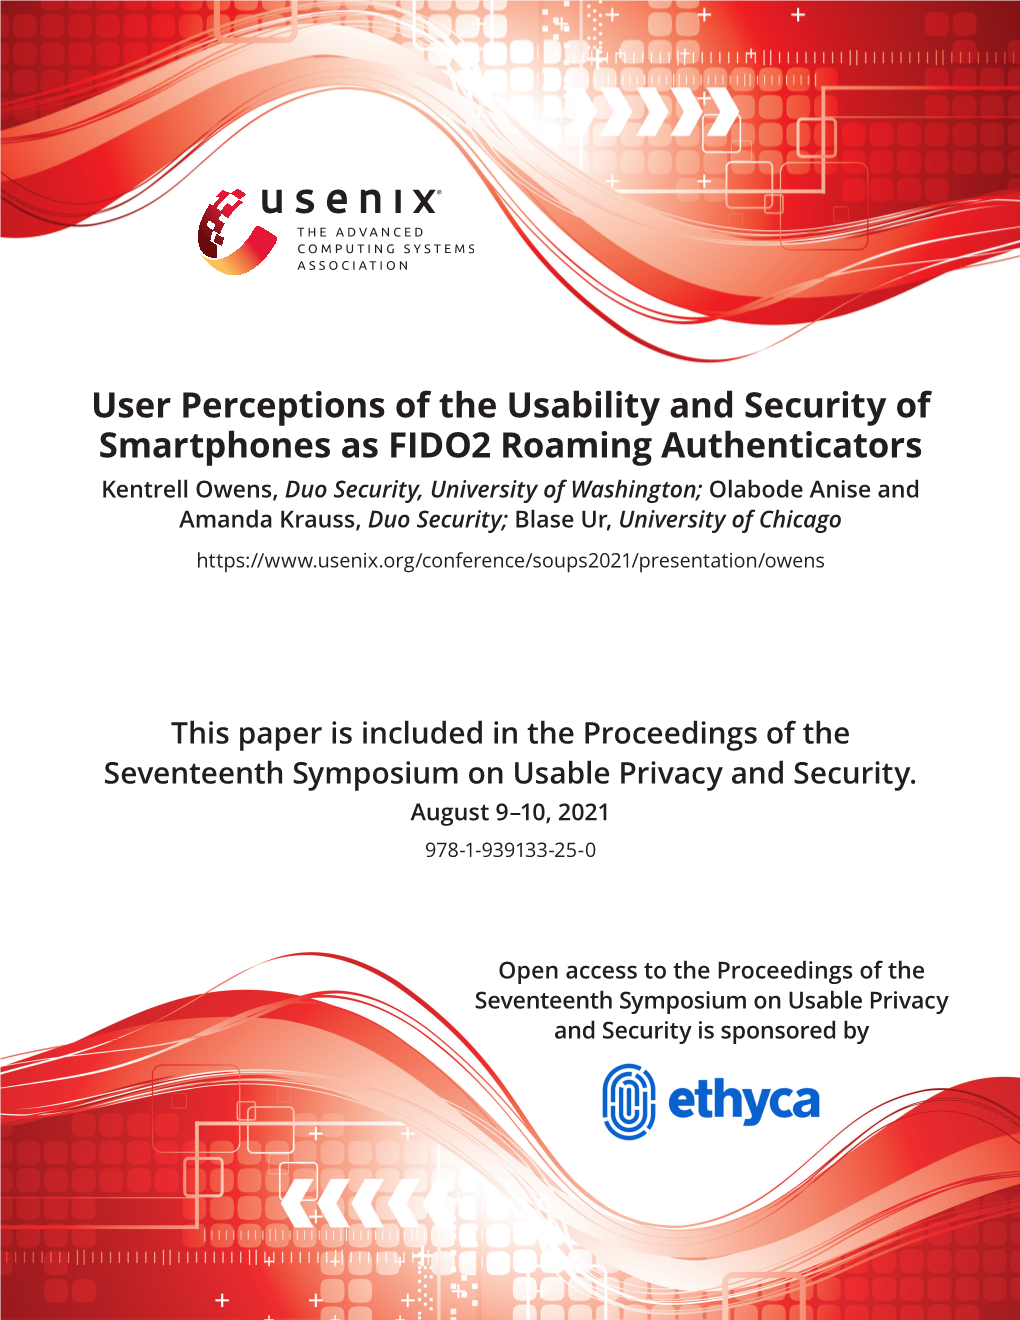 User Perceptions of the Usability and Security of Smartphones As FIDO2